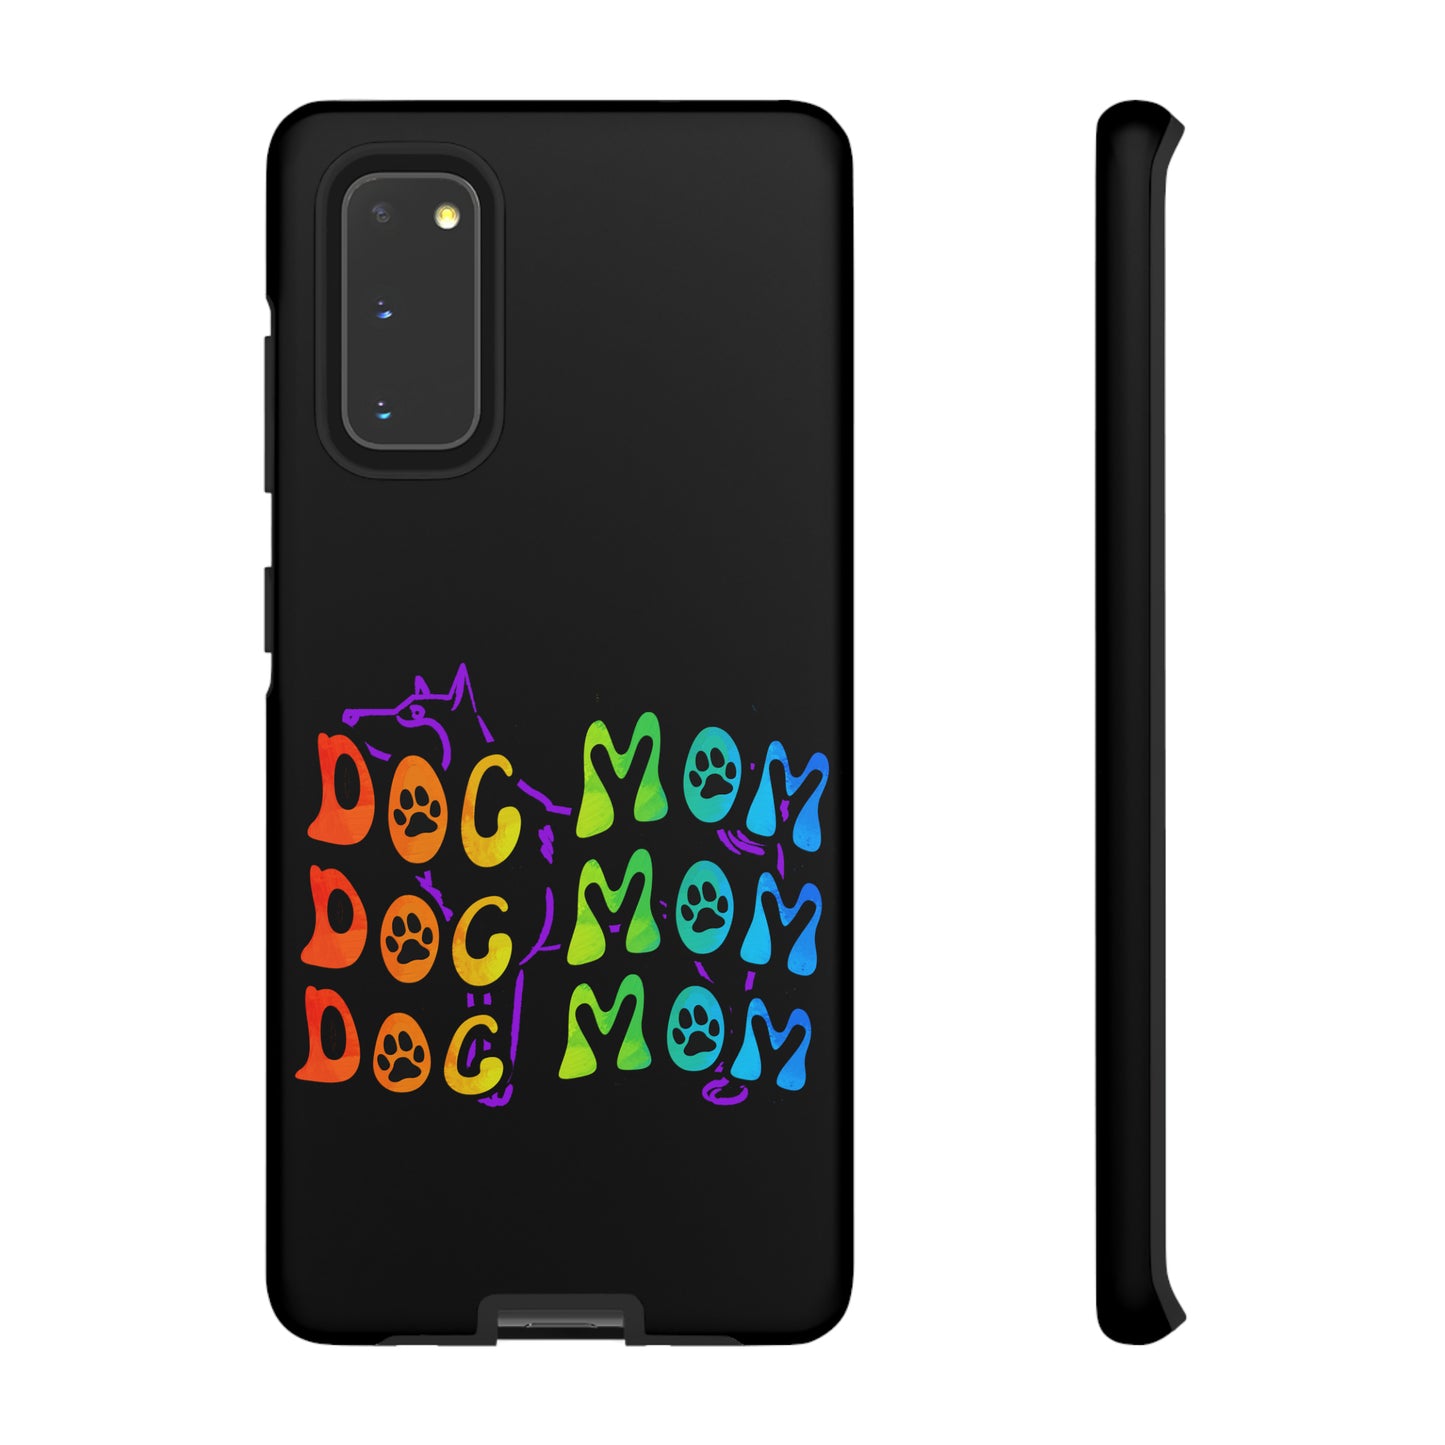 Dog Mom Protective Phone Case, Samsung, iPhone, Pixel, all sizes